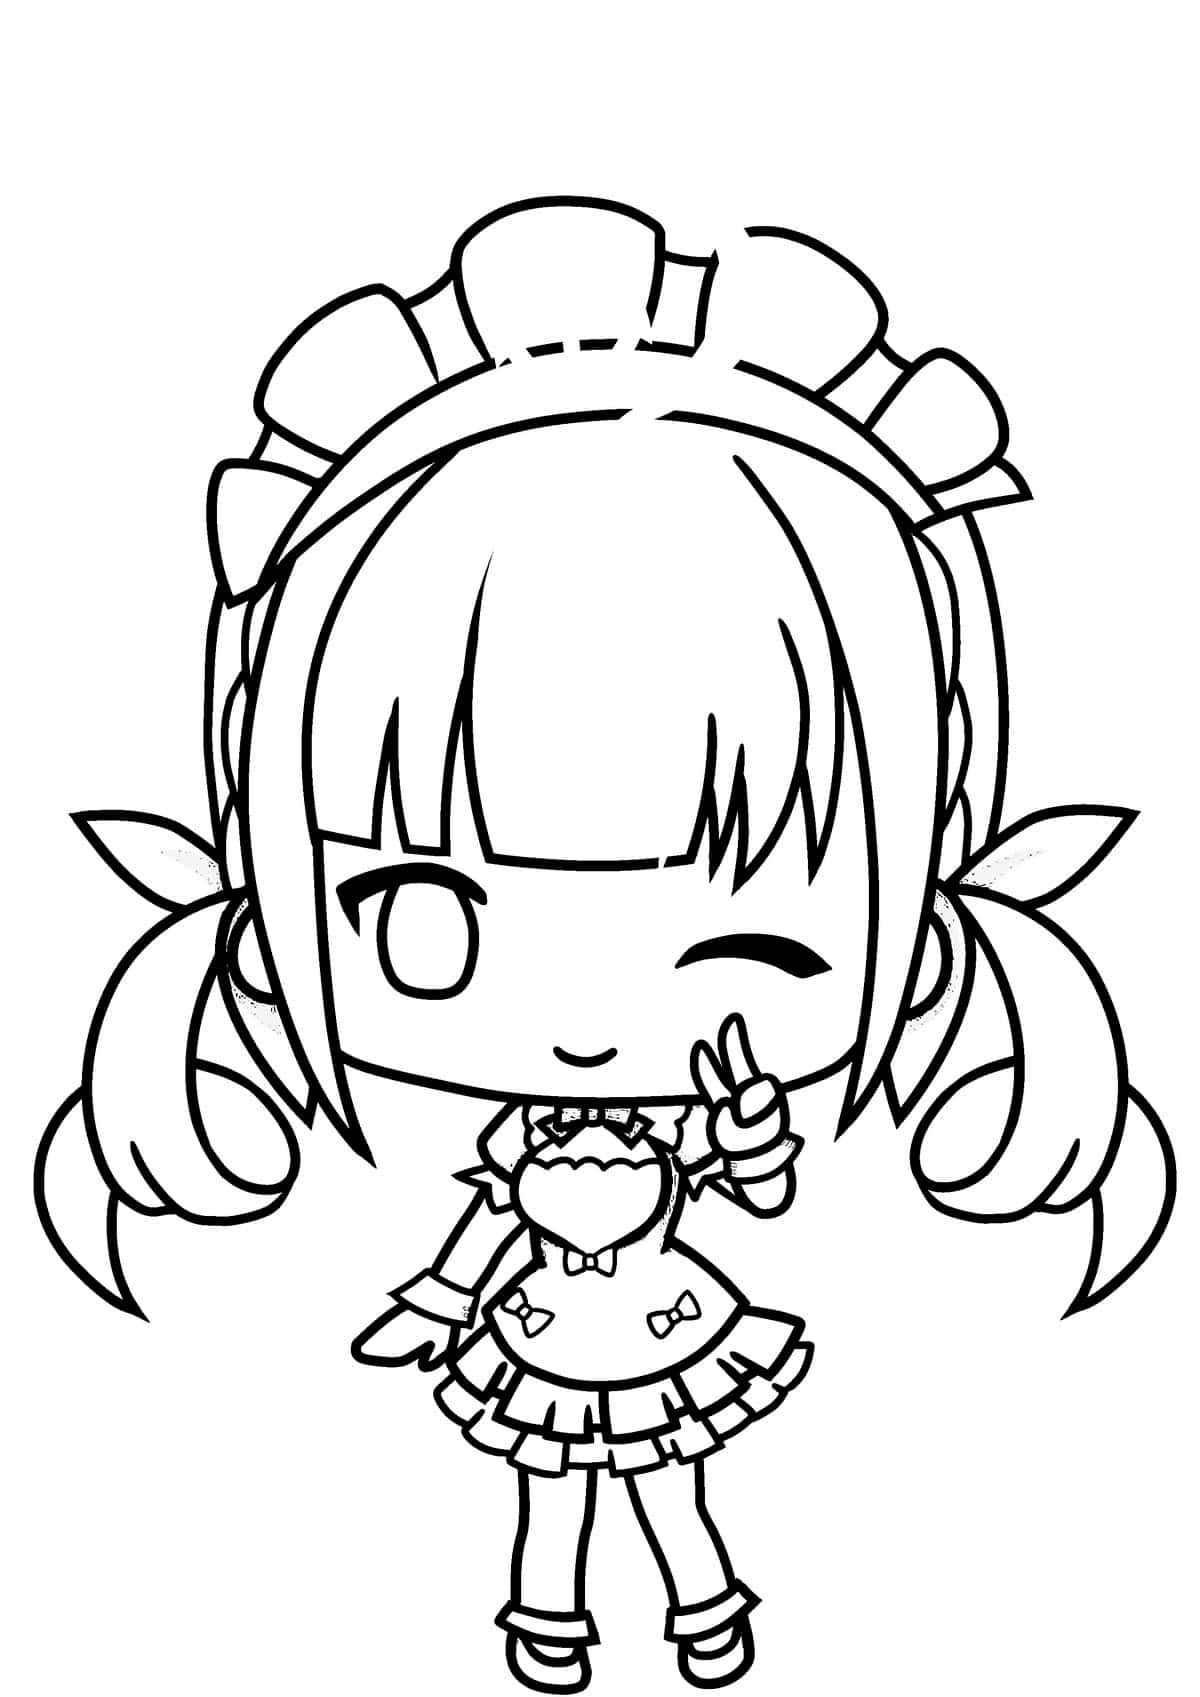 Anime Princess Coloring Pages  Get Coloring Pages